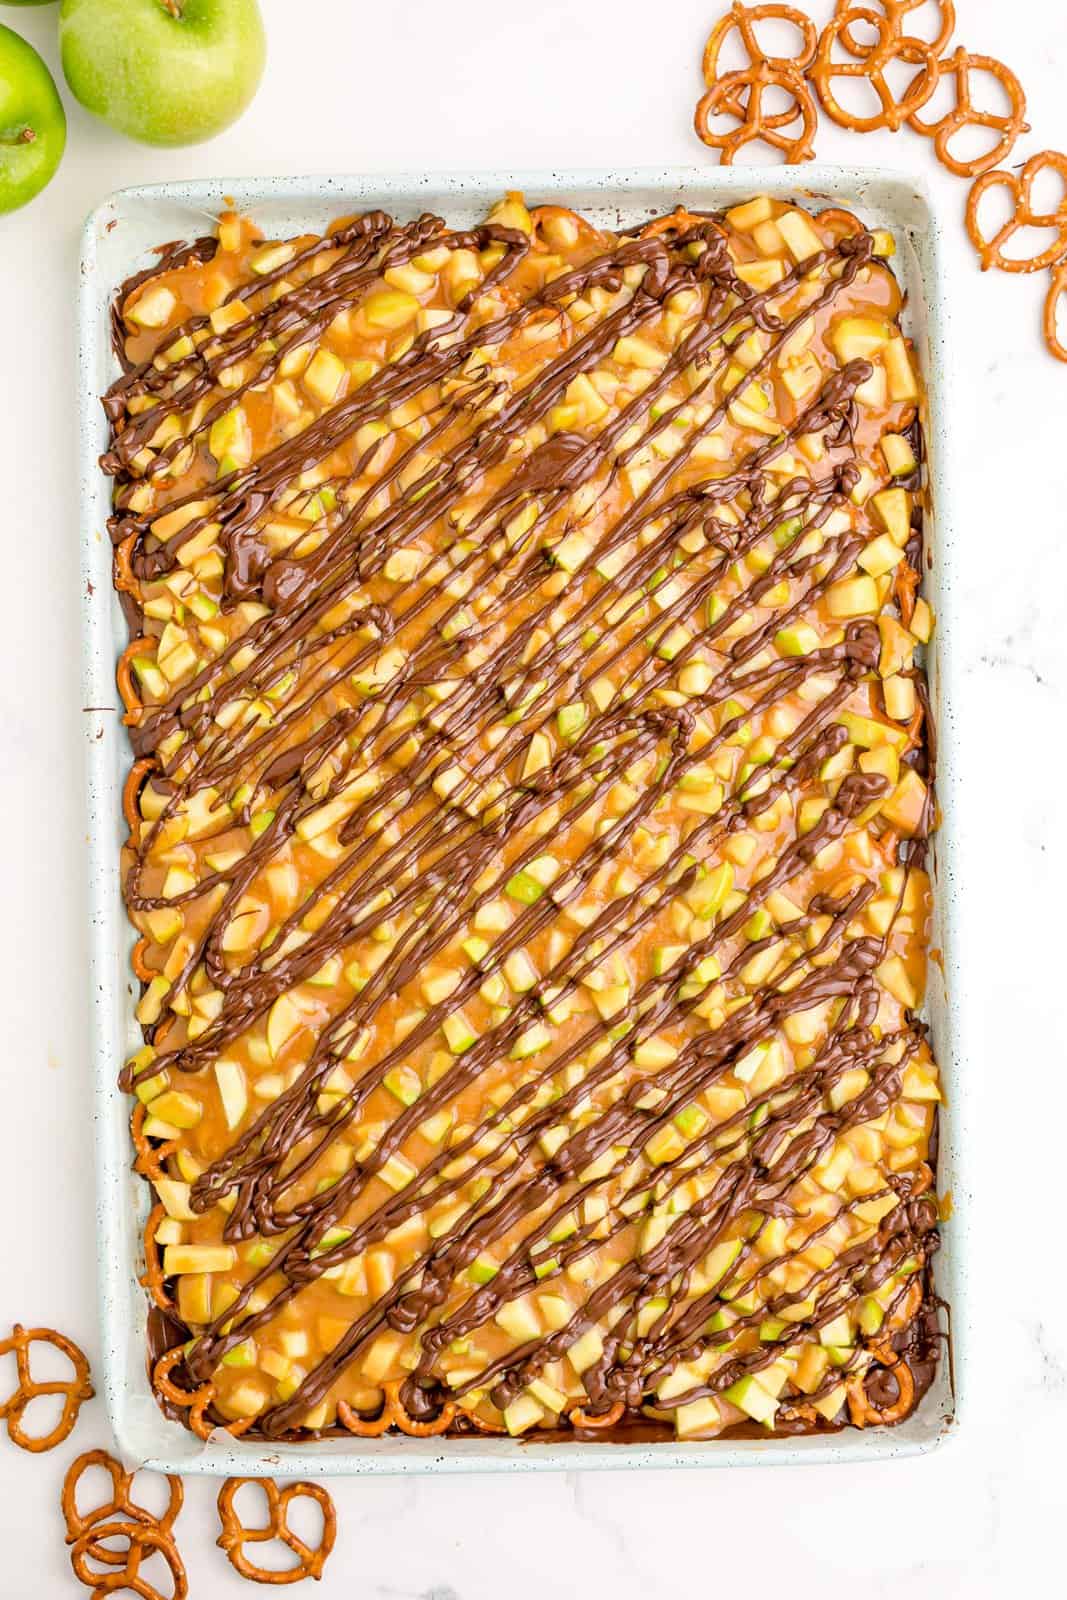 Remaining chocolate drizzled over caramel apple toping.